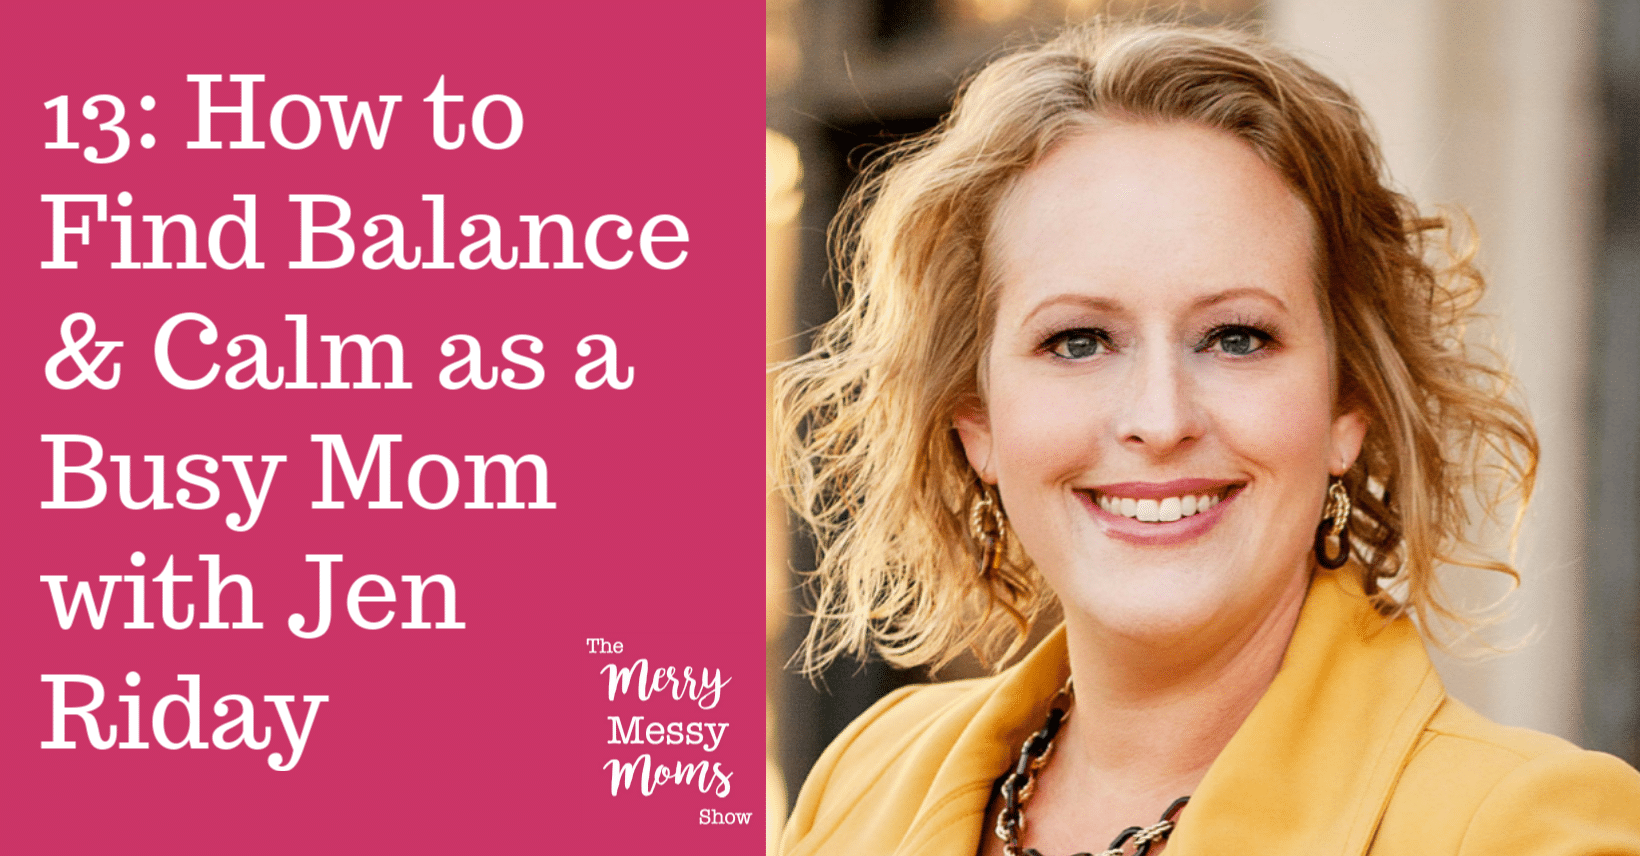 How to Find Balance and Calm as a Busy Mom with Jen Riday on The Merry Messy Moms Show